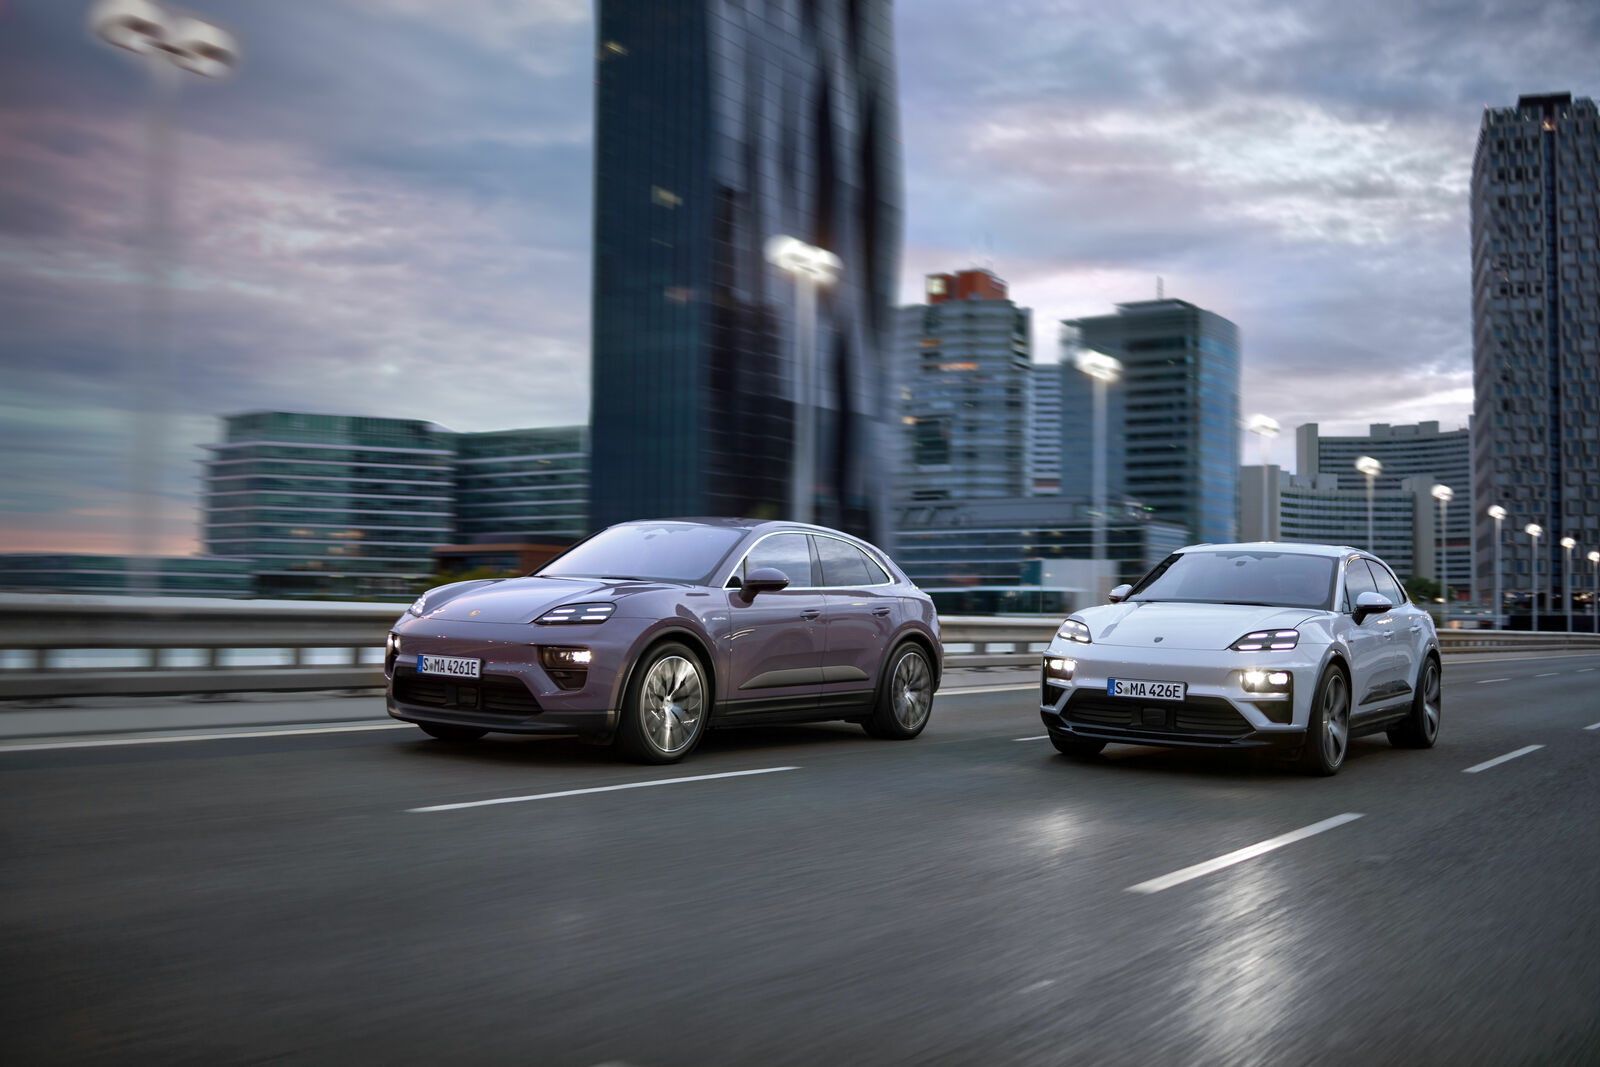 Two modern electric SUVs in lilac and silver drive side by side on a city highway, with skyscrapers and a cloudy sky in the background.